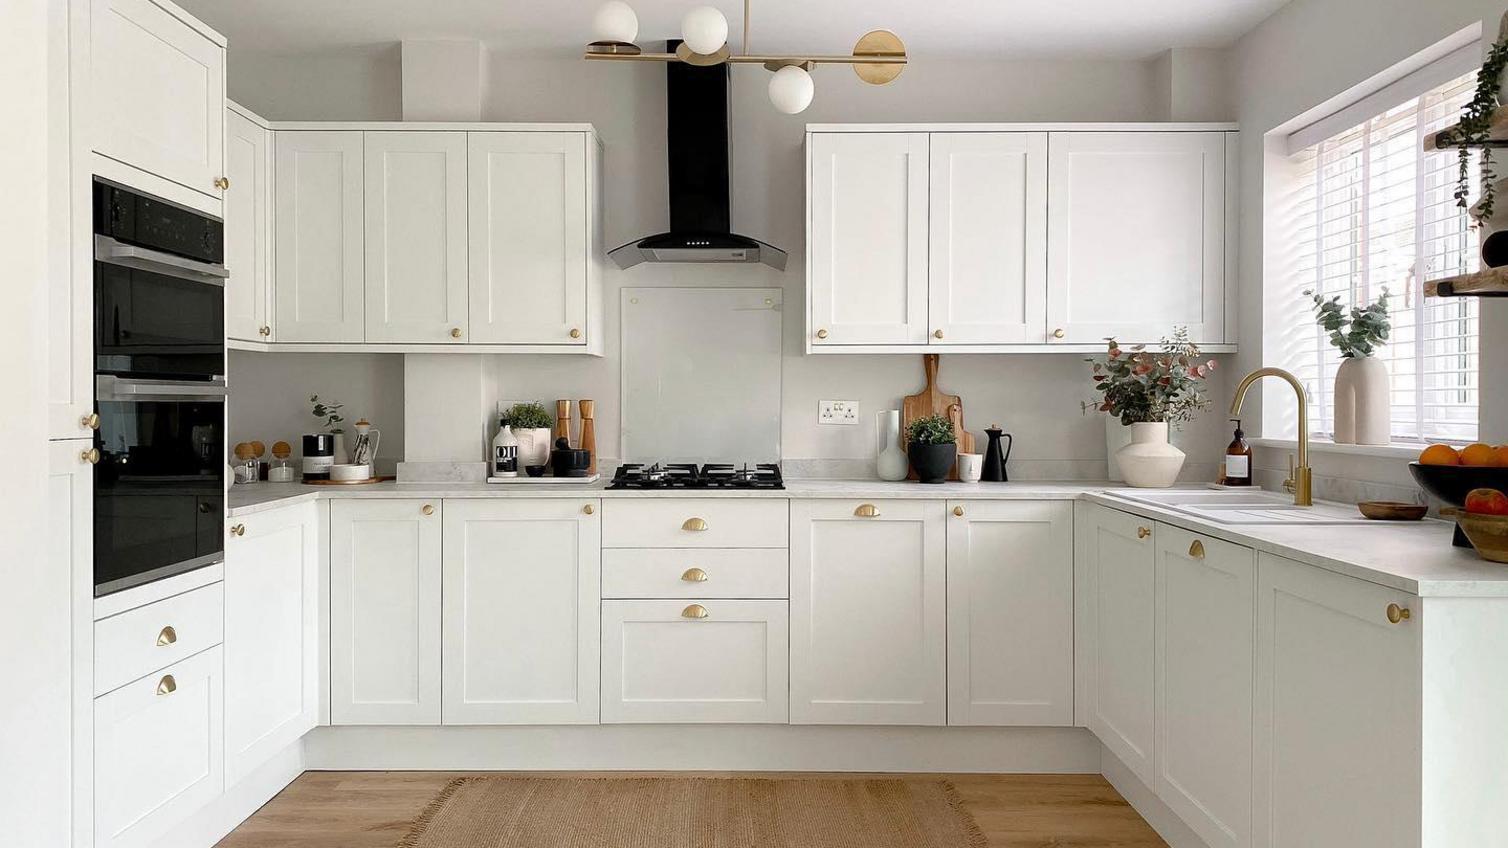 An impressive white shaker kitchen made from standard-sized cabinets